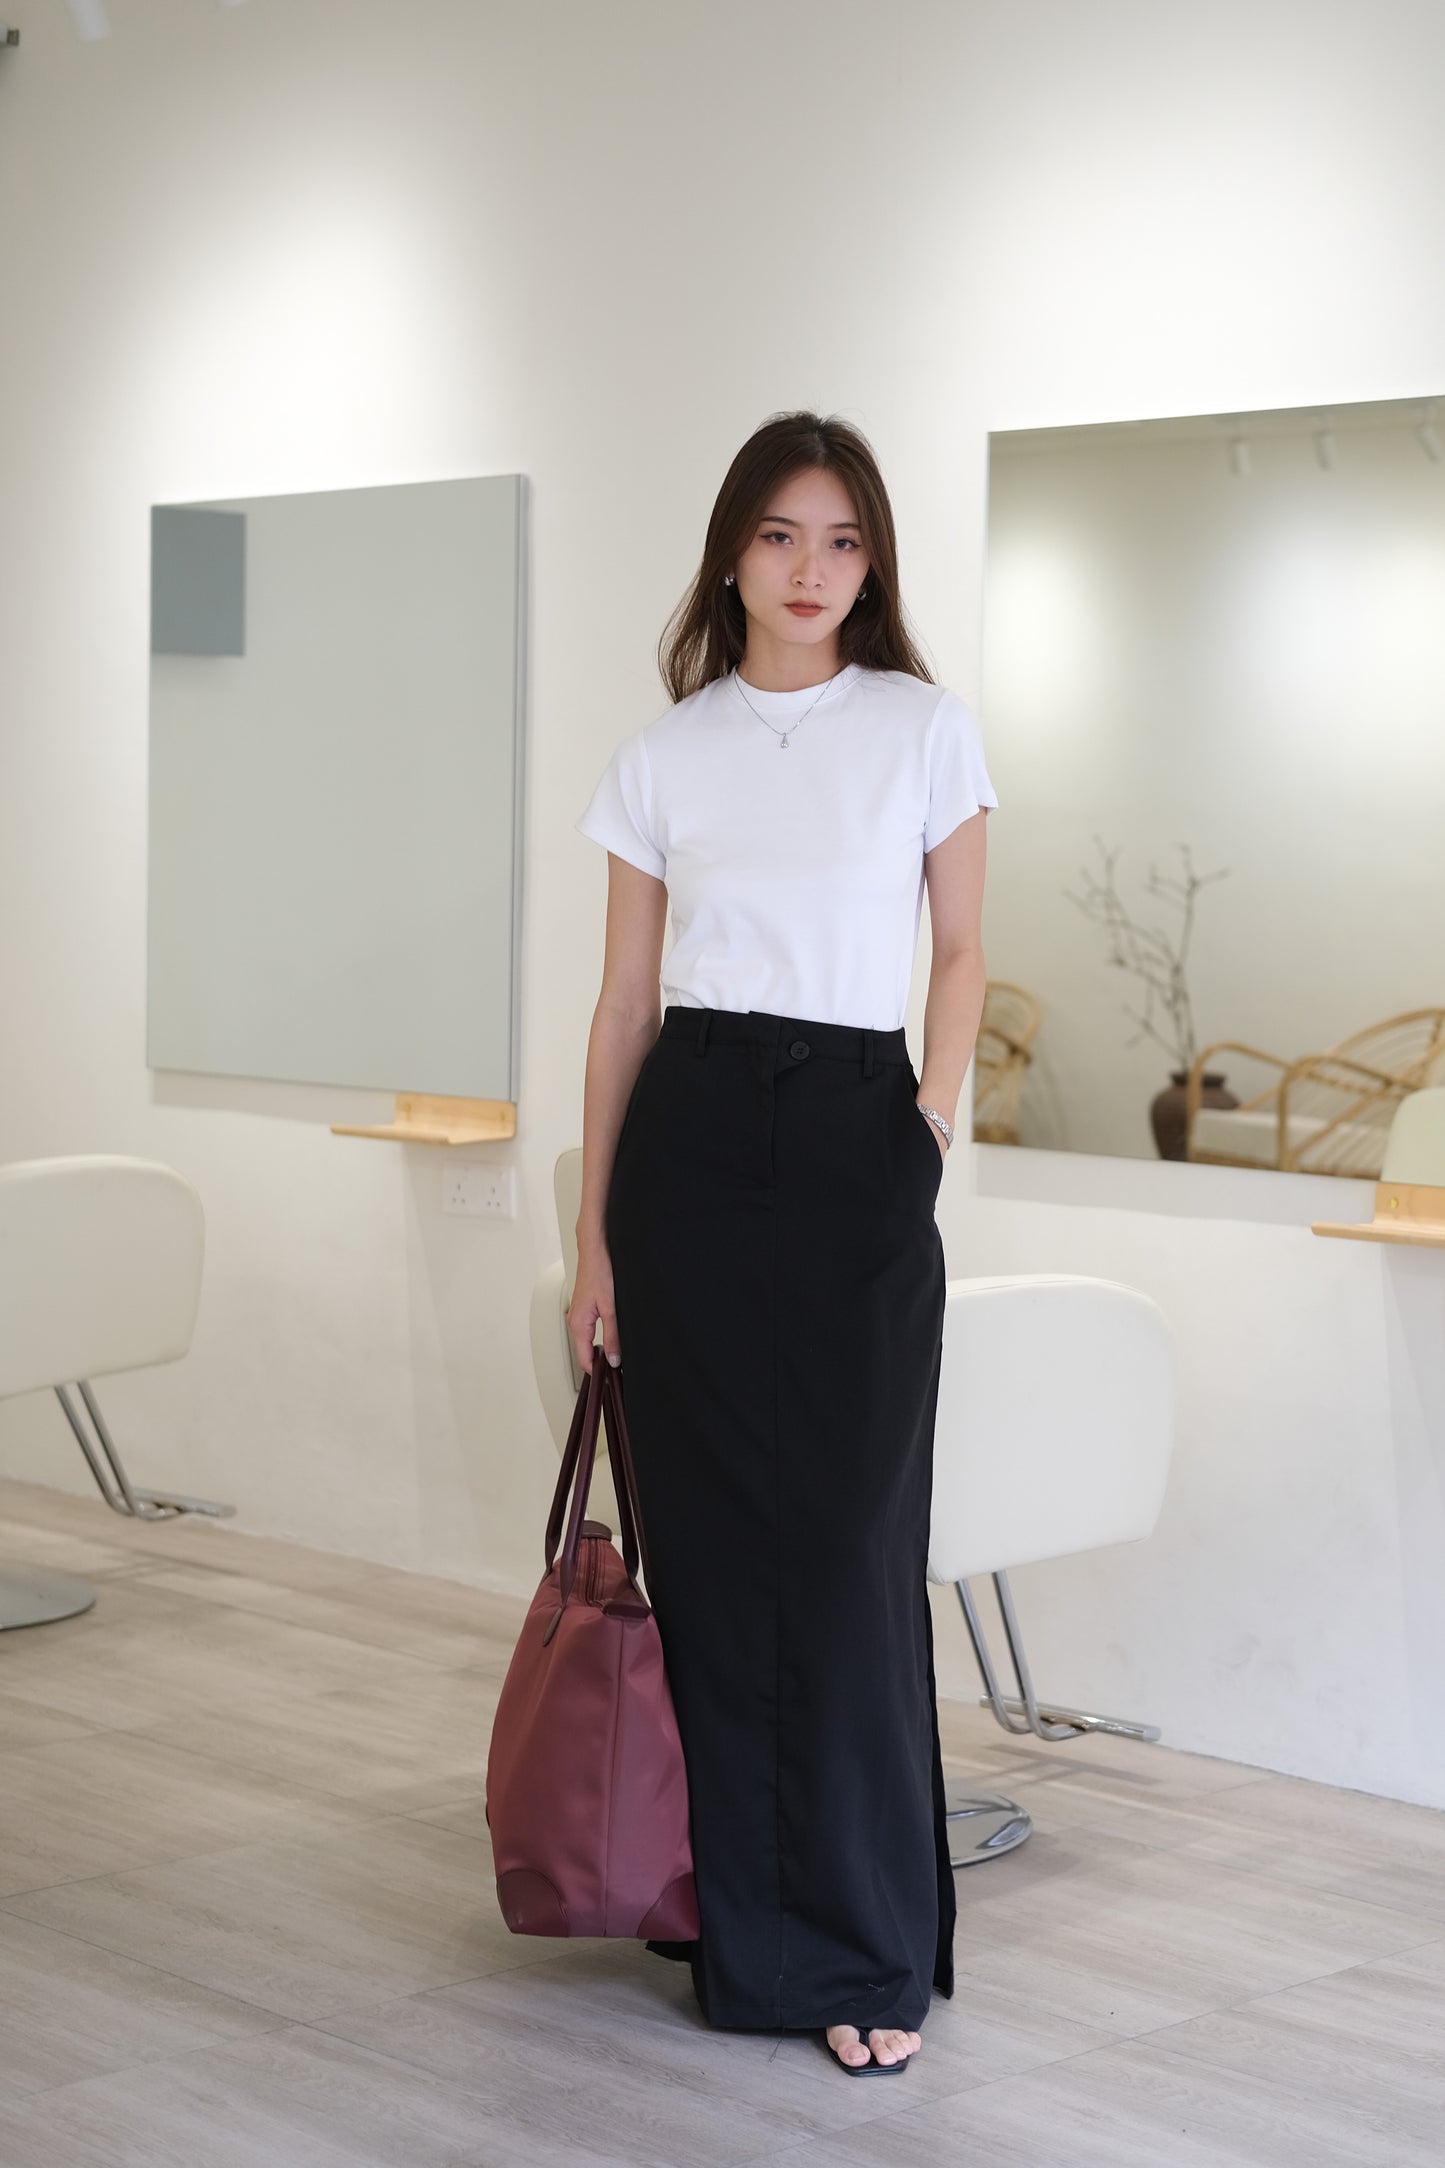 High-waisted skirt in classic black